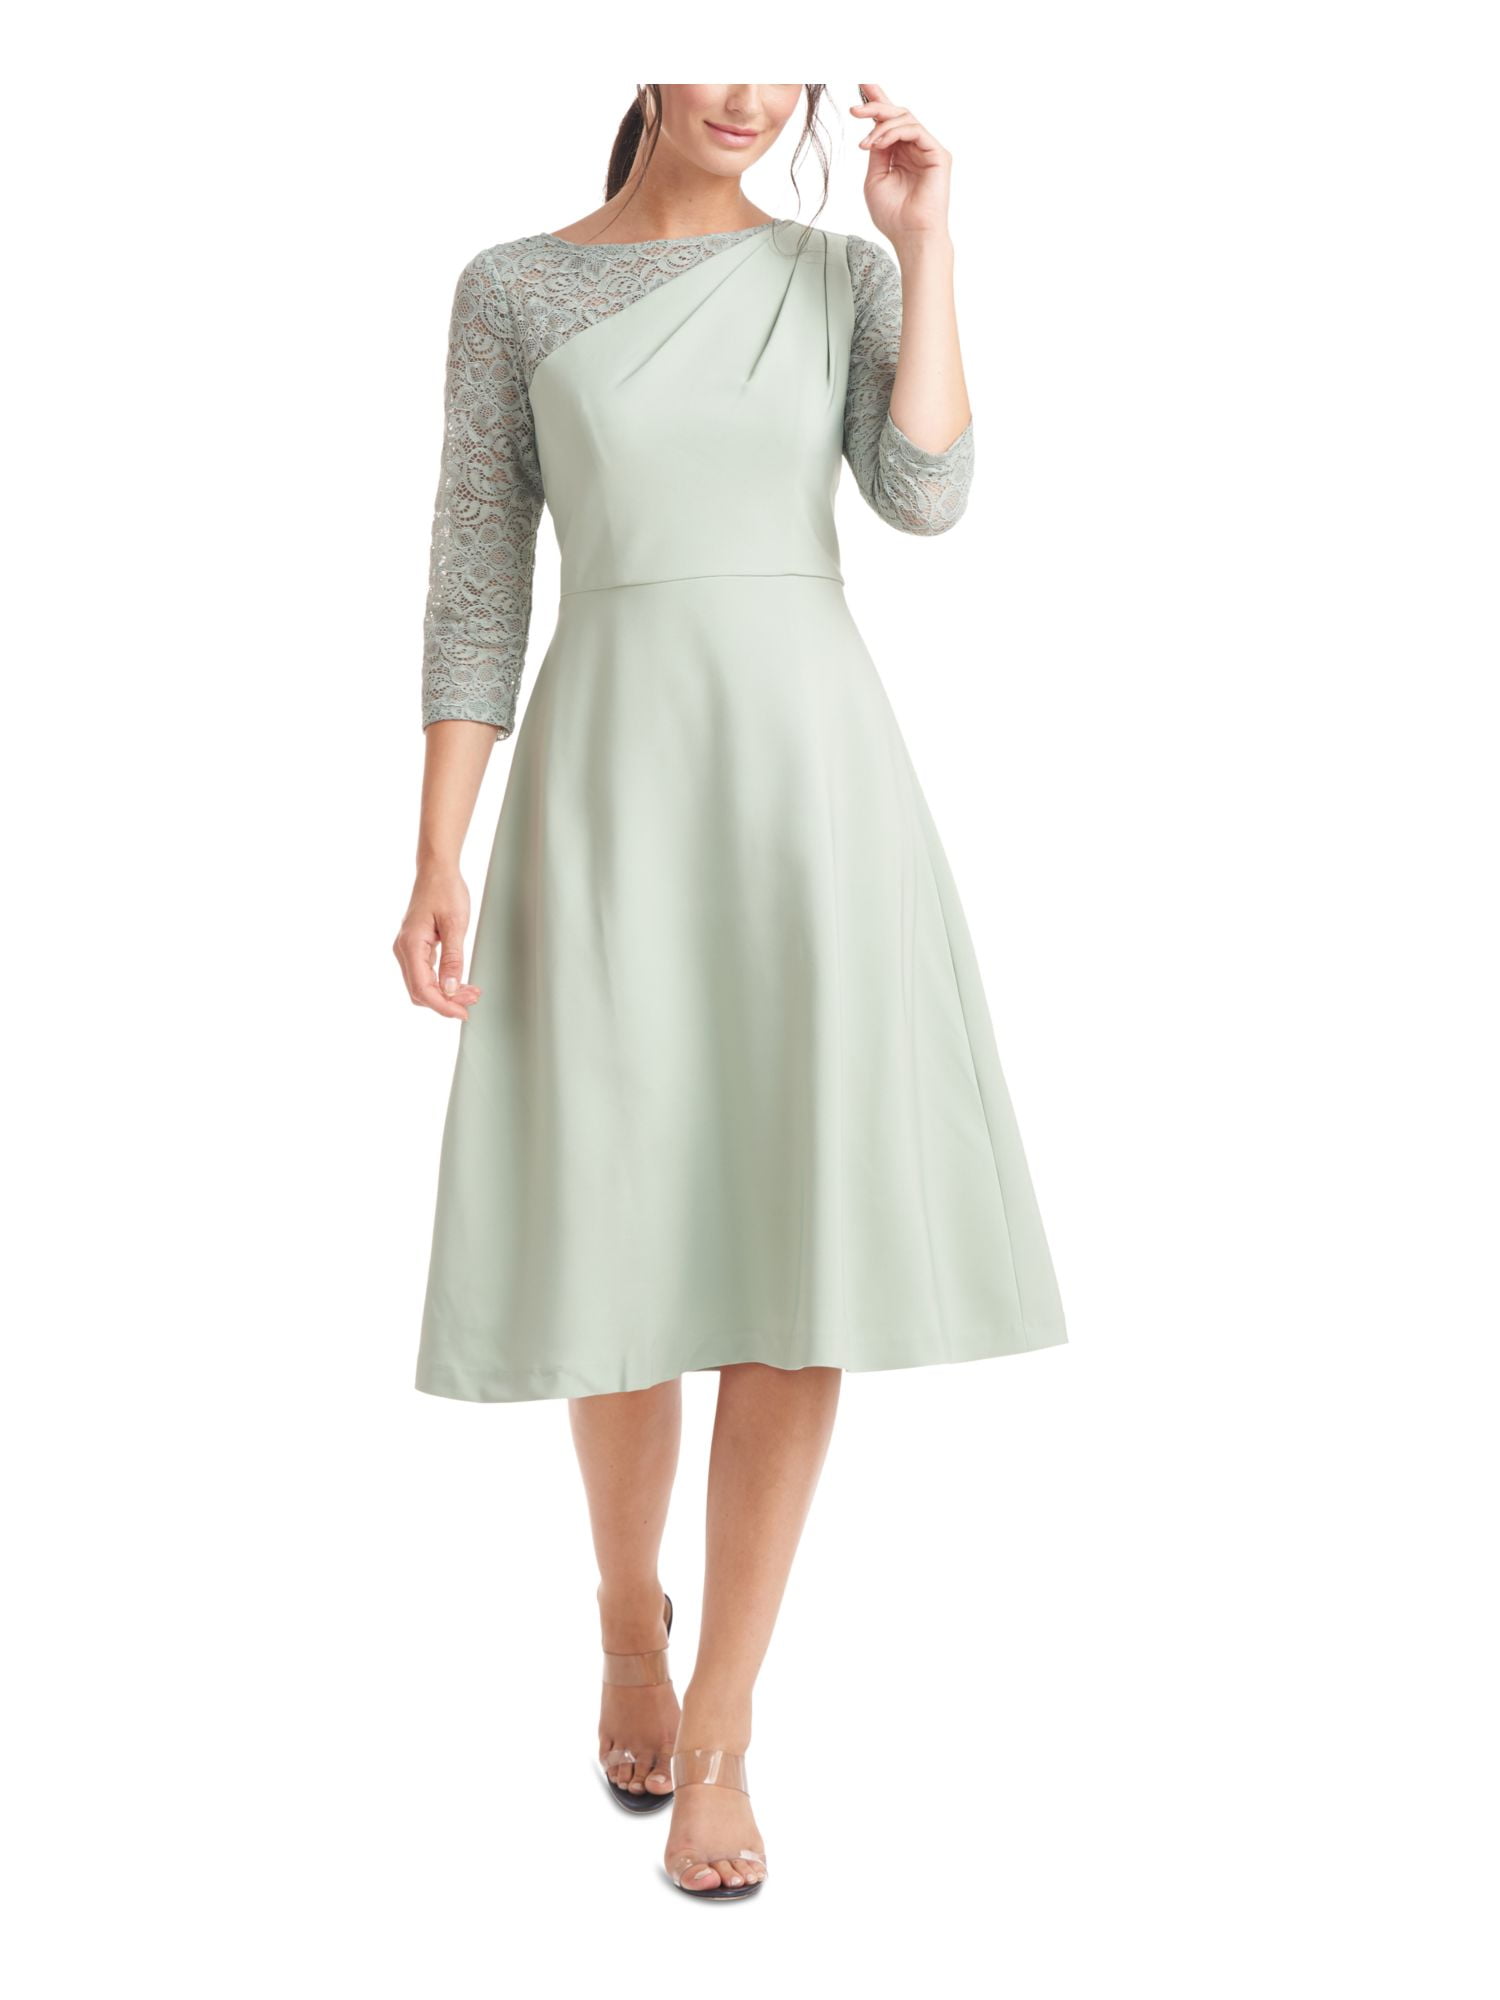 Flared dress with a neckline, SUK147 green